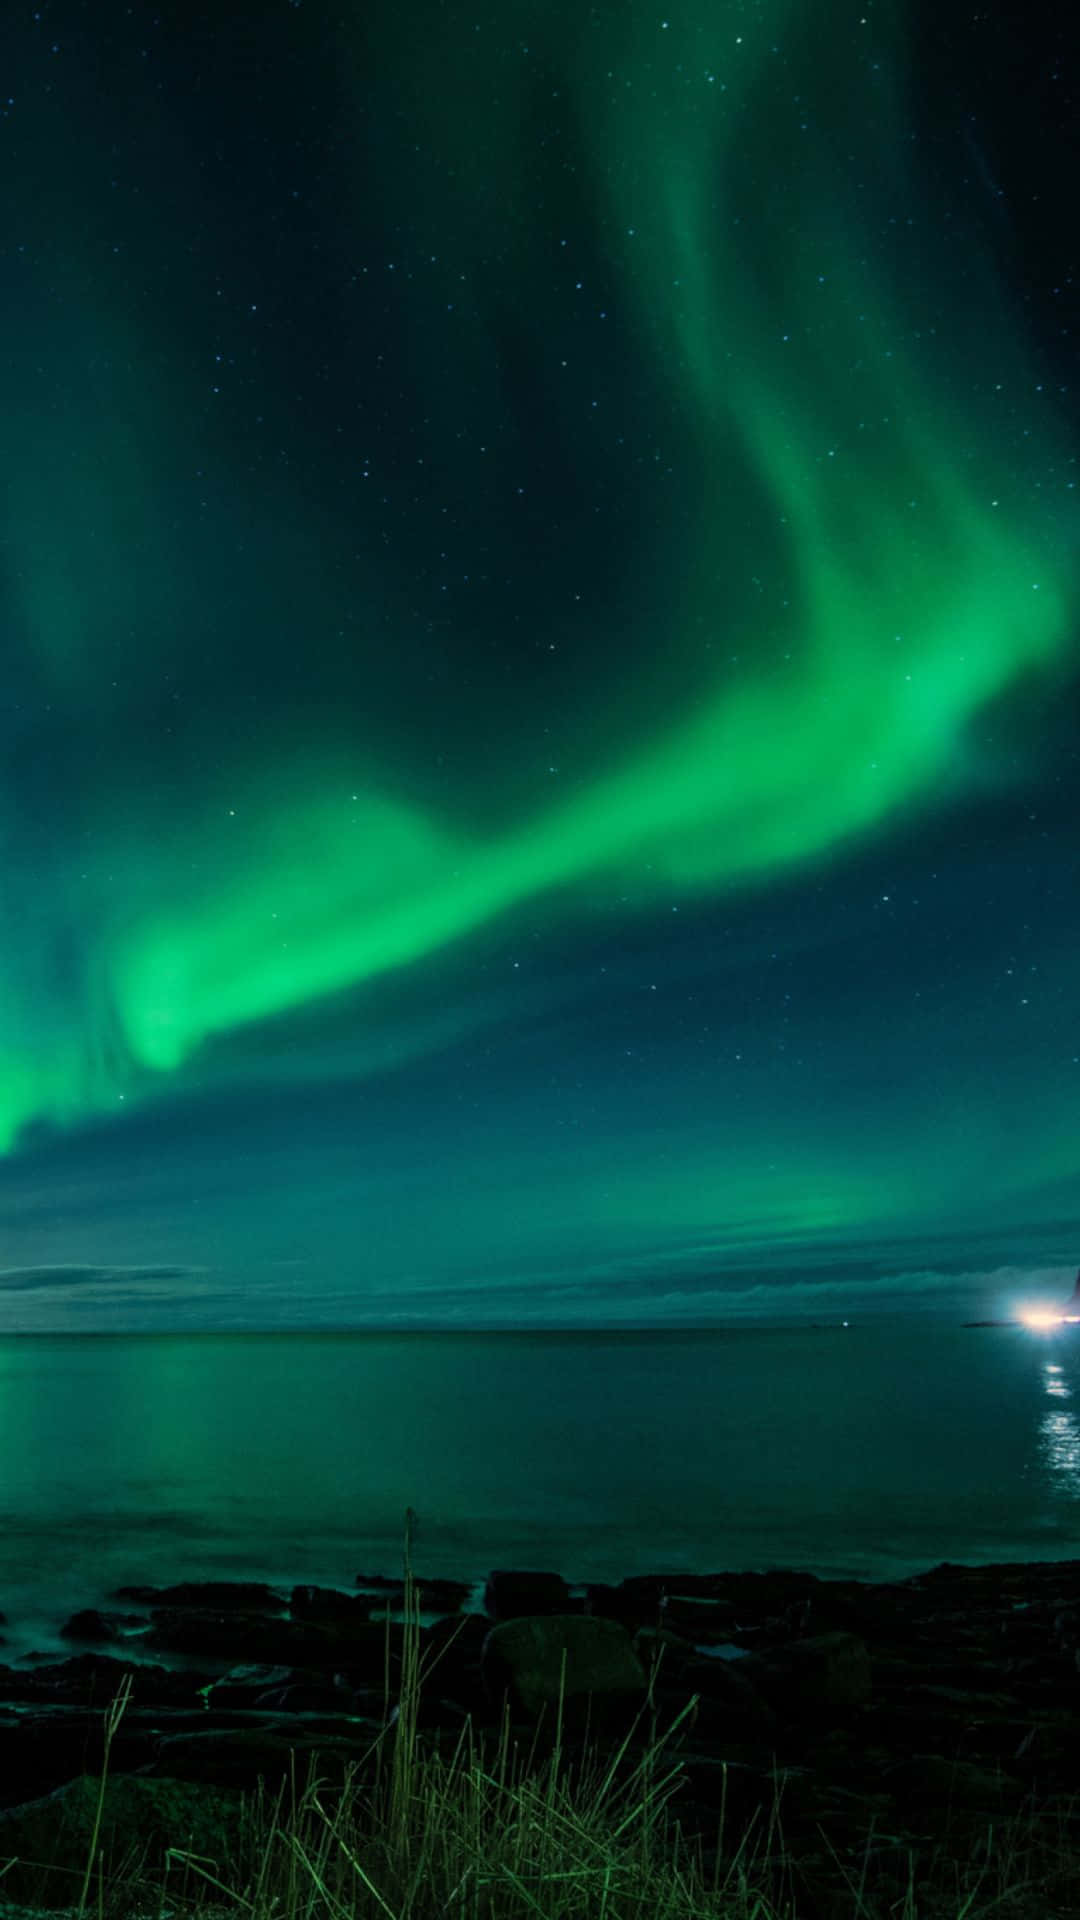 A beautiful night sky lit up by the Northern Lights